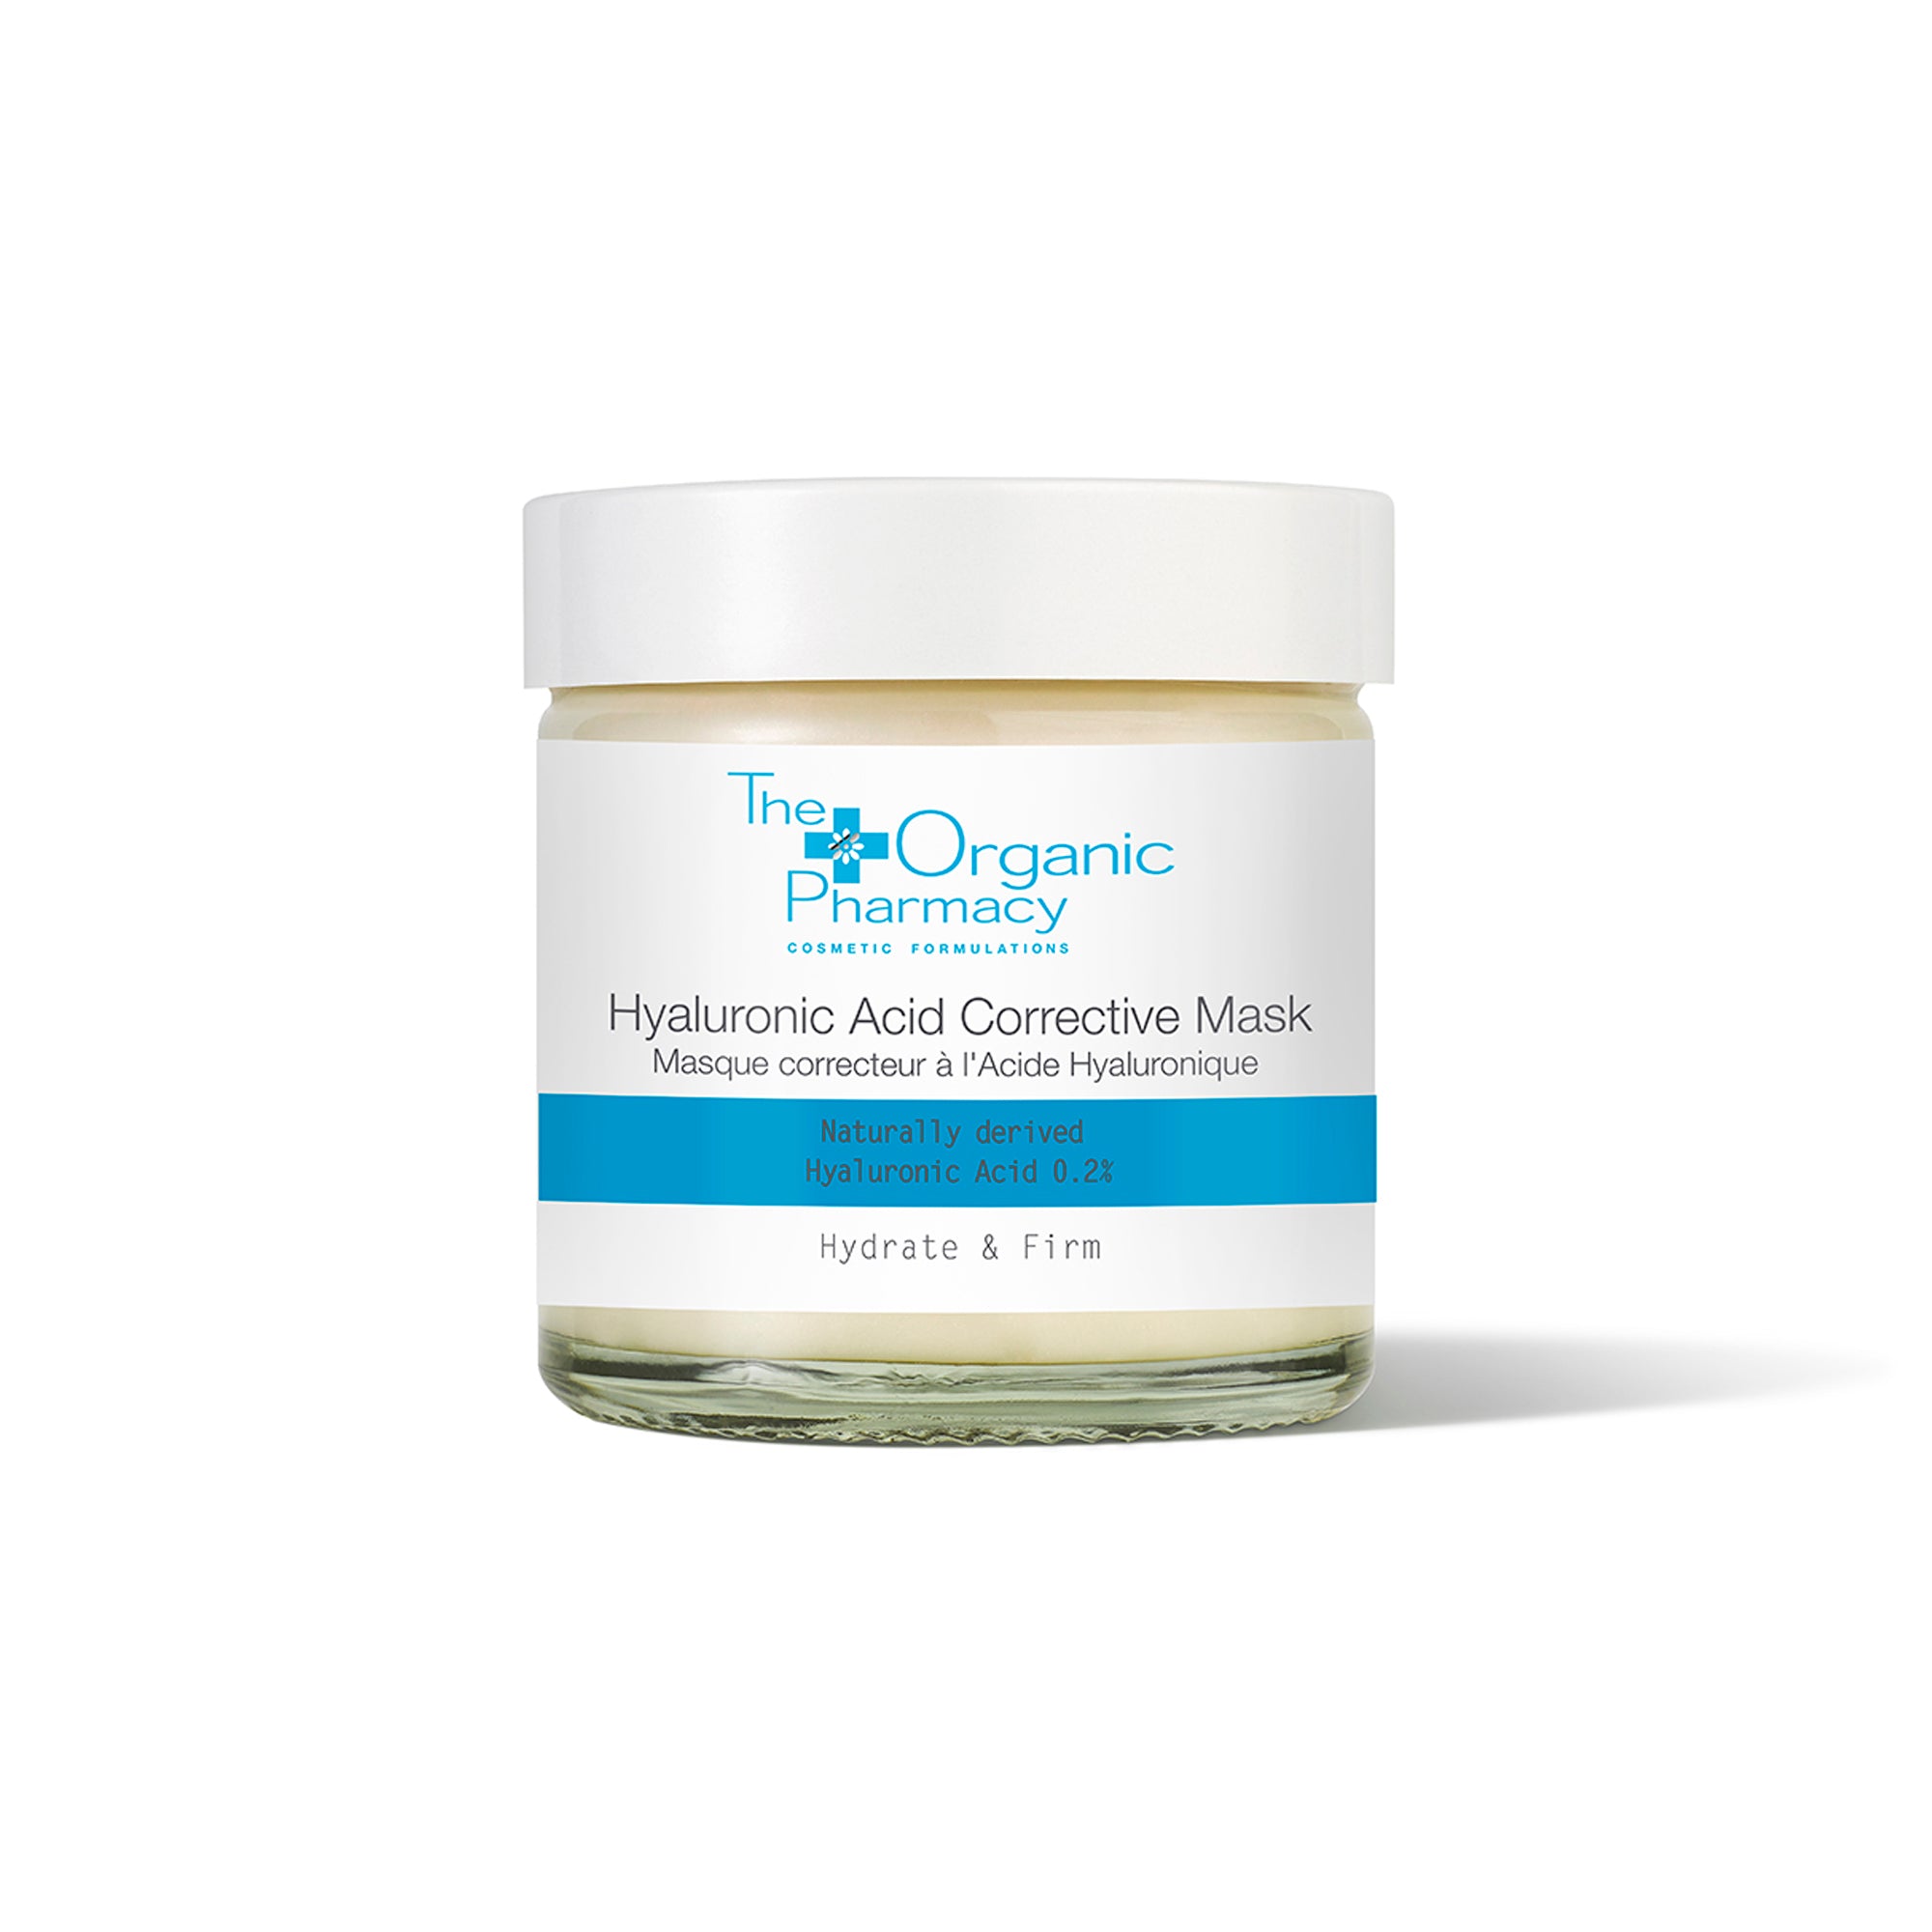 Hyaluronic Acid Corrective Facial Mask to instantly hydrate, firm, and plump expression lines and wrinkles.